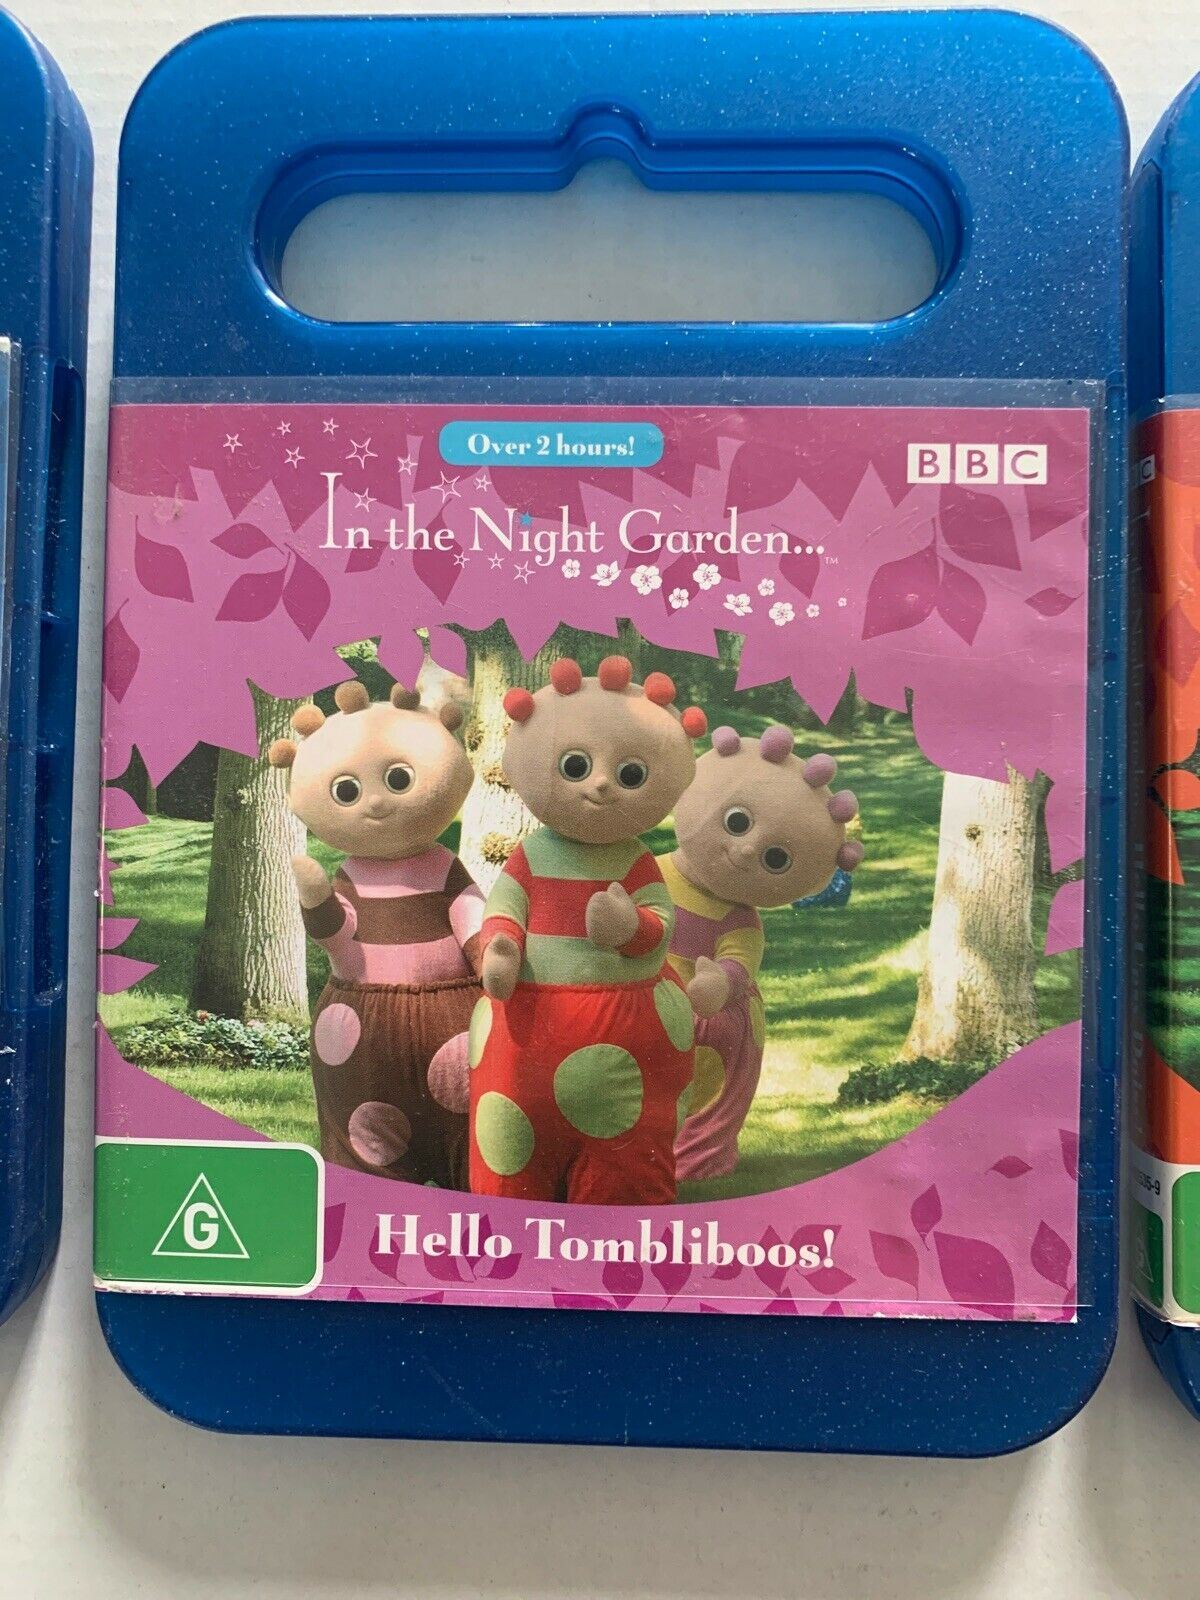 In the Night Garden 4x DVD Set - Hello Tombliboos! Upsy Daisy, Out For A Walk